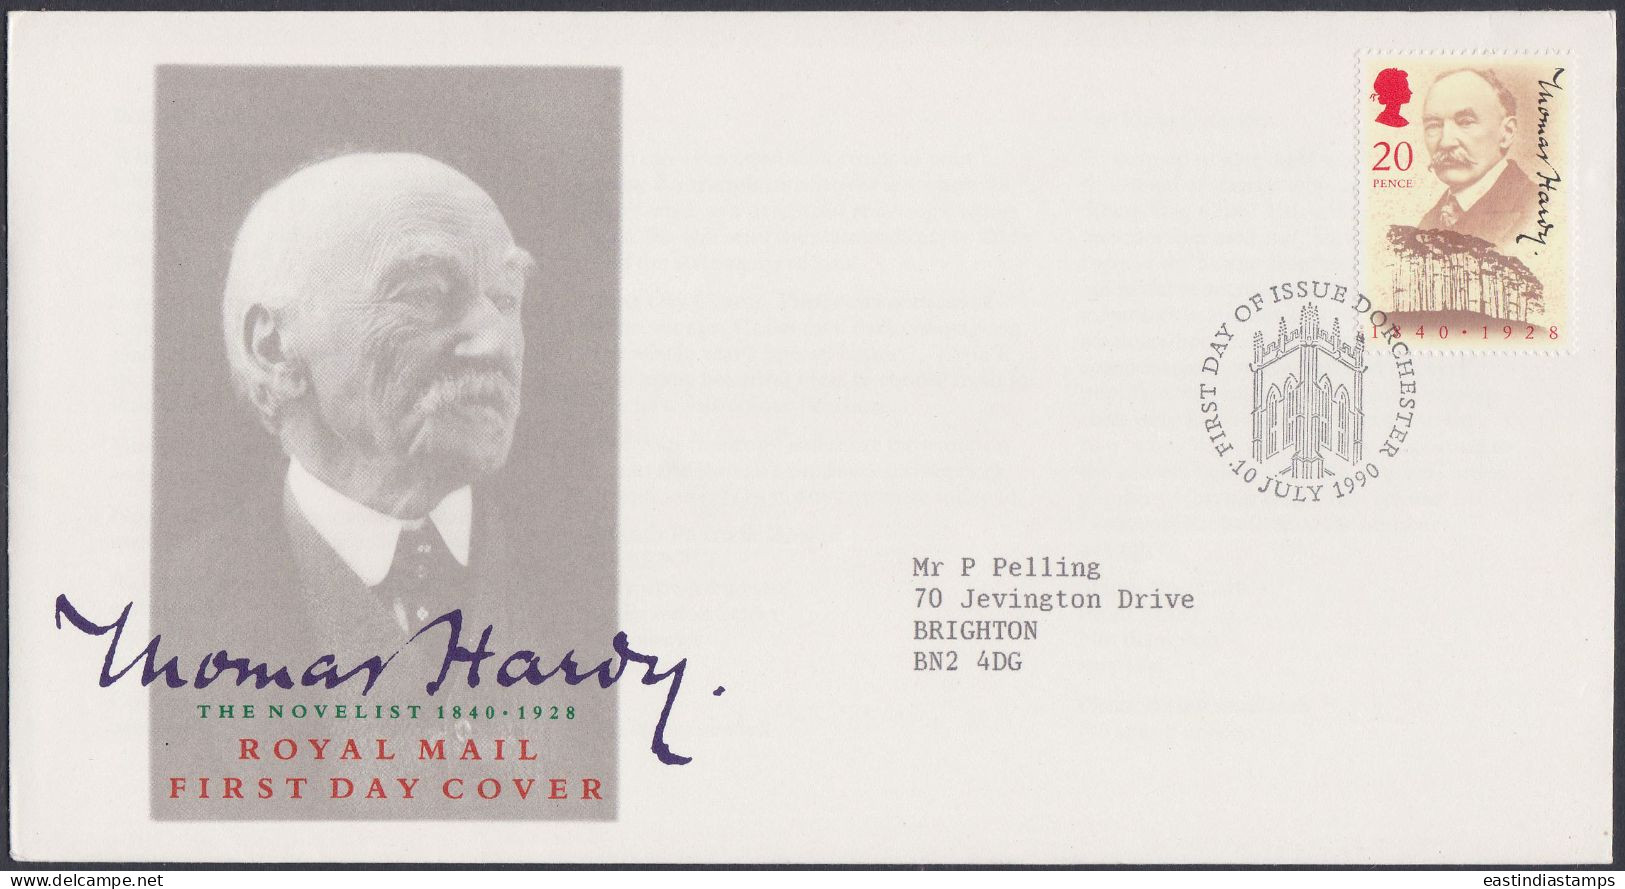 GB Great Britain 1990 FDC Thomas Hardy, Novelist, Novel, Literature, Art, Books, Pictorial Postmark, First Day Cover - Cartas & Documentos